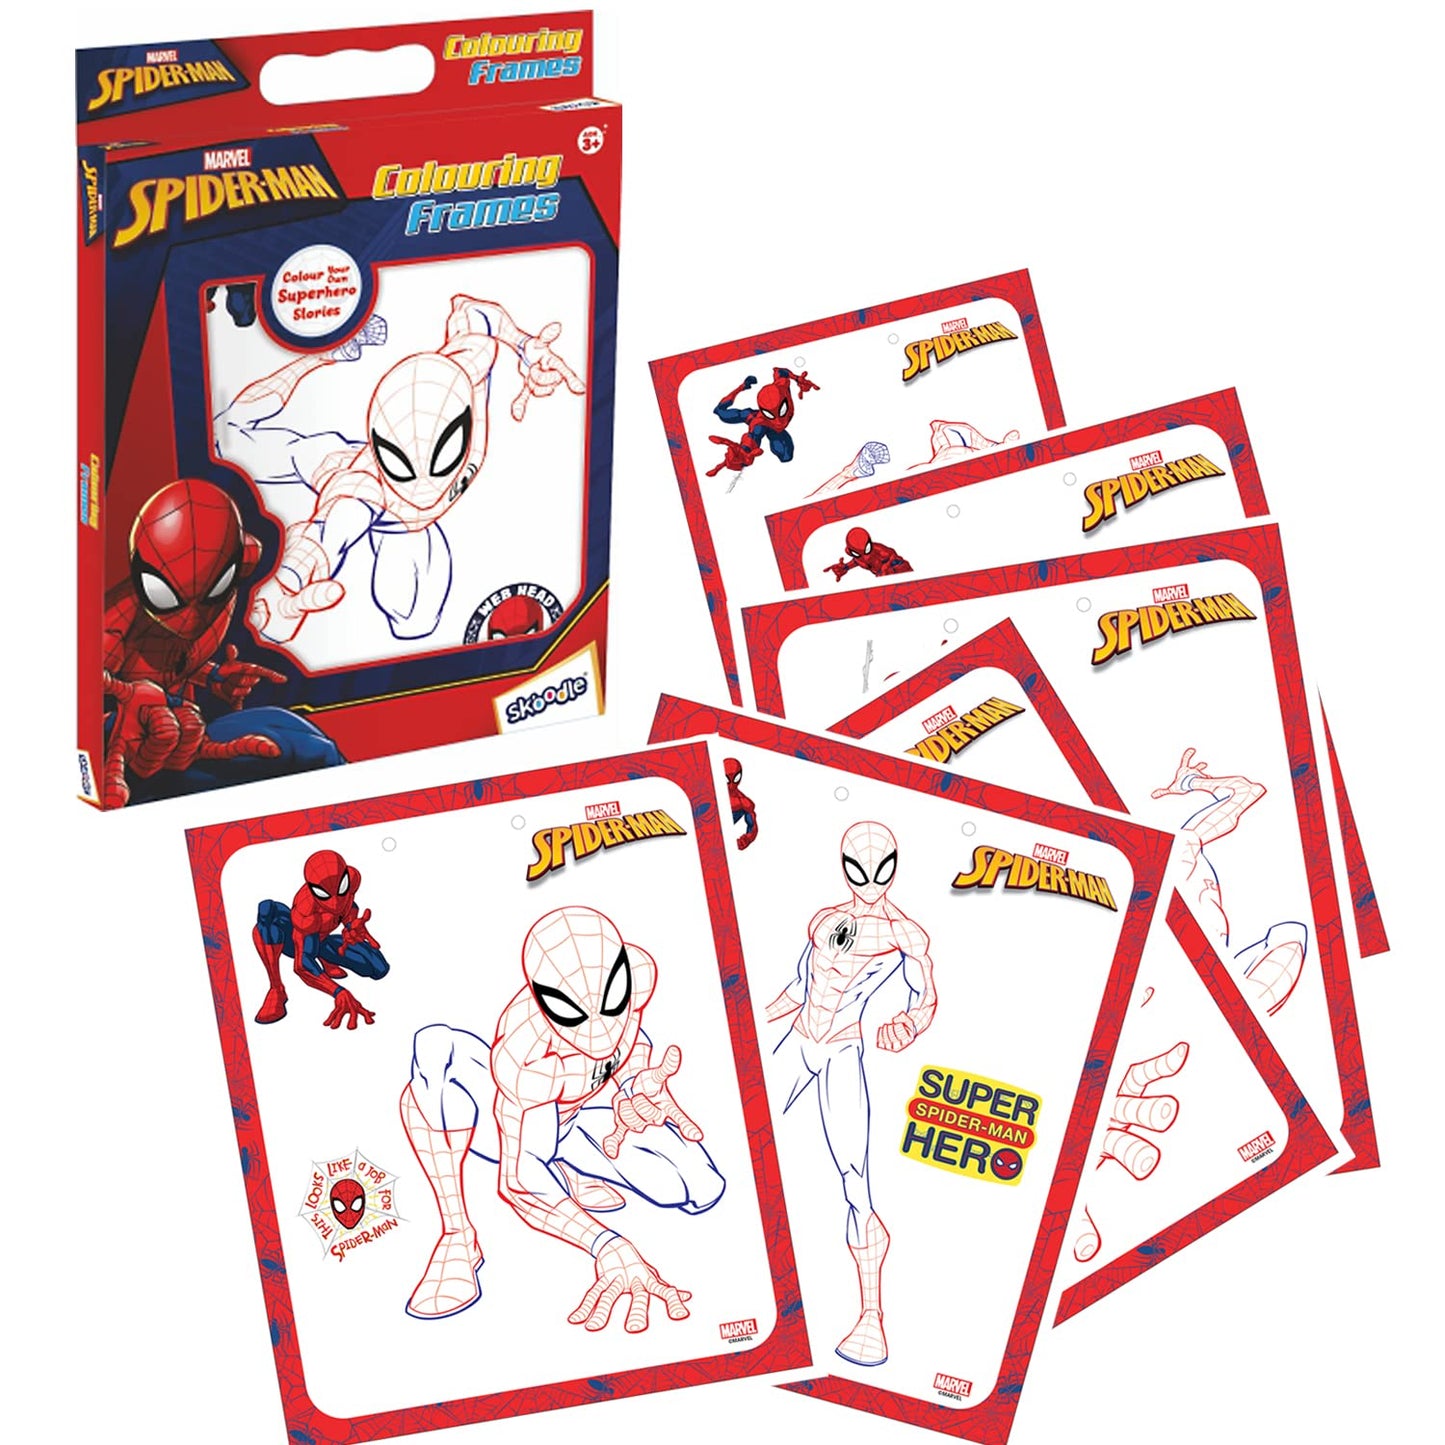 Skoodle Marvel Spiderman Colouring Frames for Kids, Specially Crafted to Enhance Play & Colouring Experience